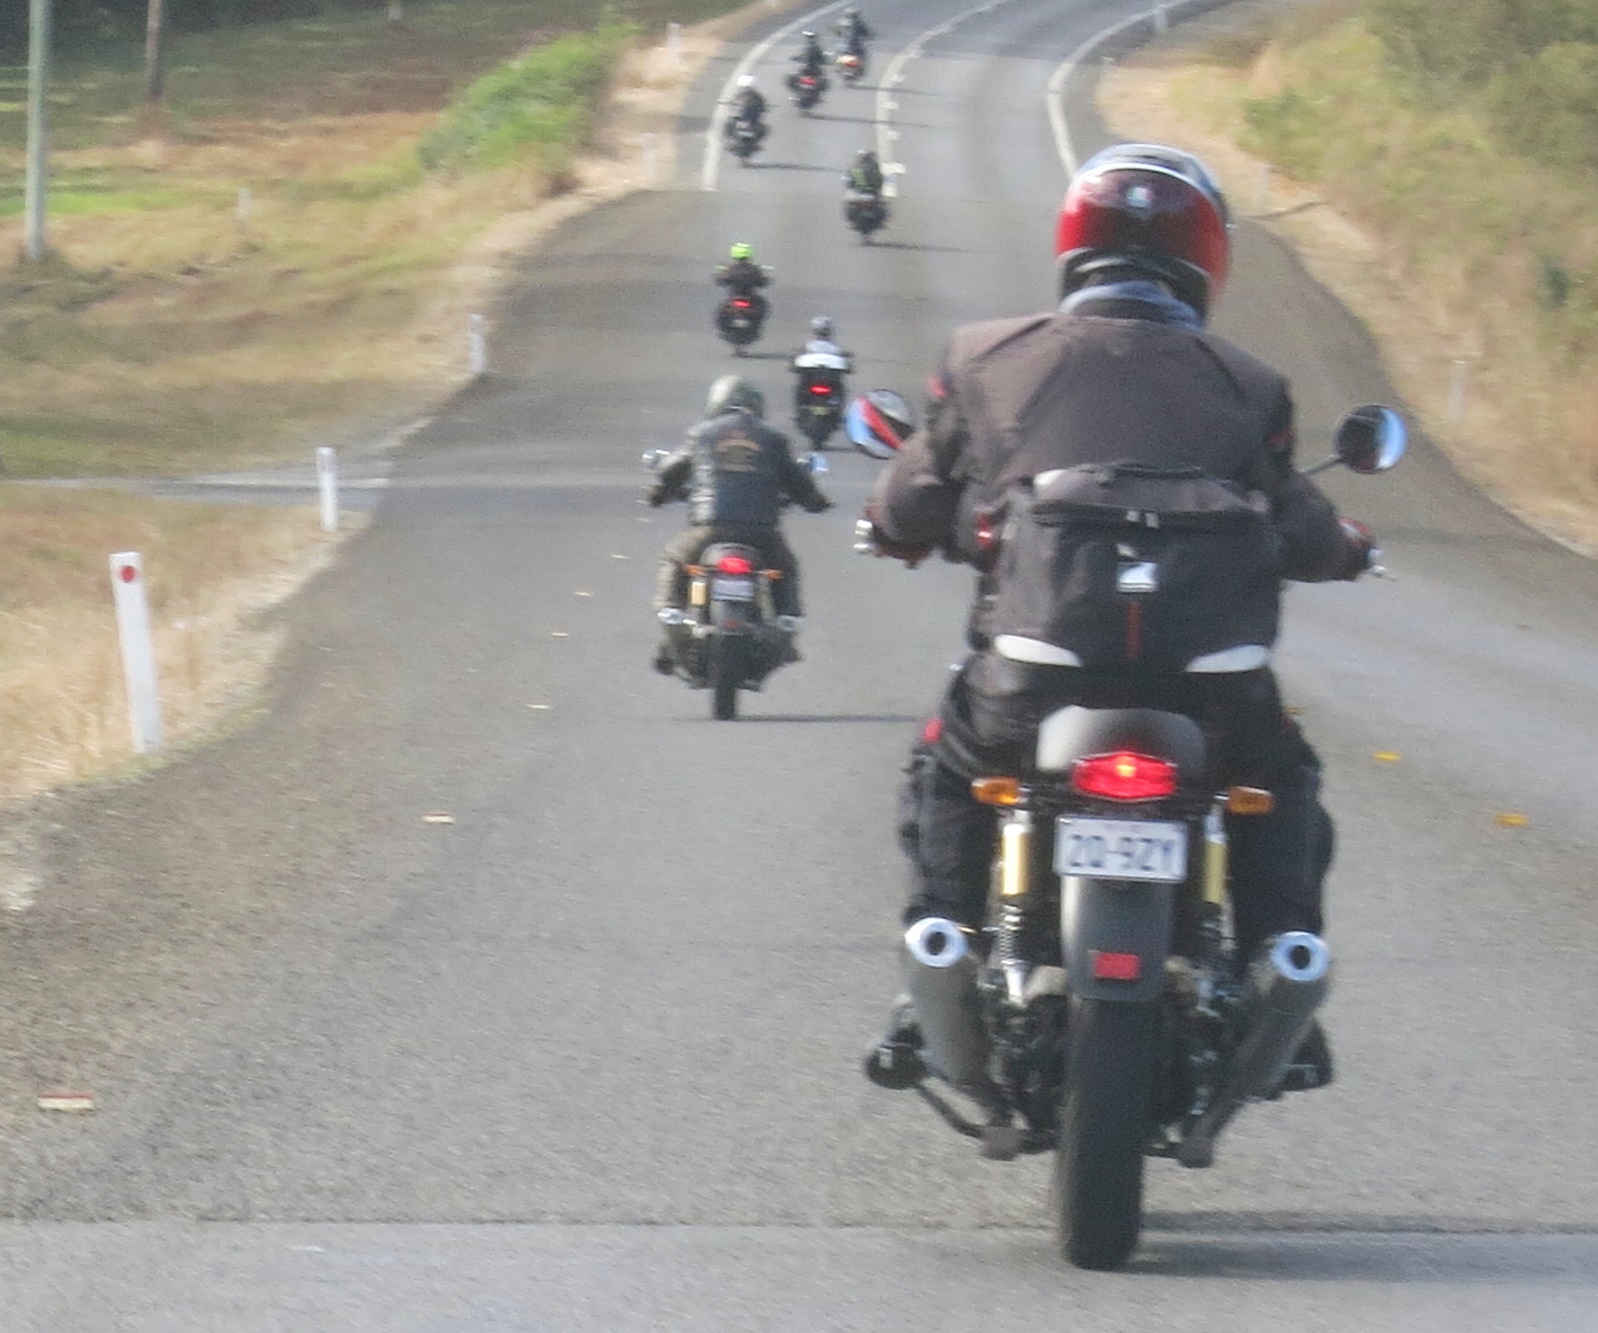 A group of people riding motorcycles down a road Description automatically generated with medium confidence